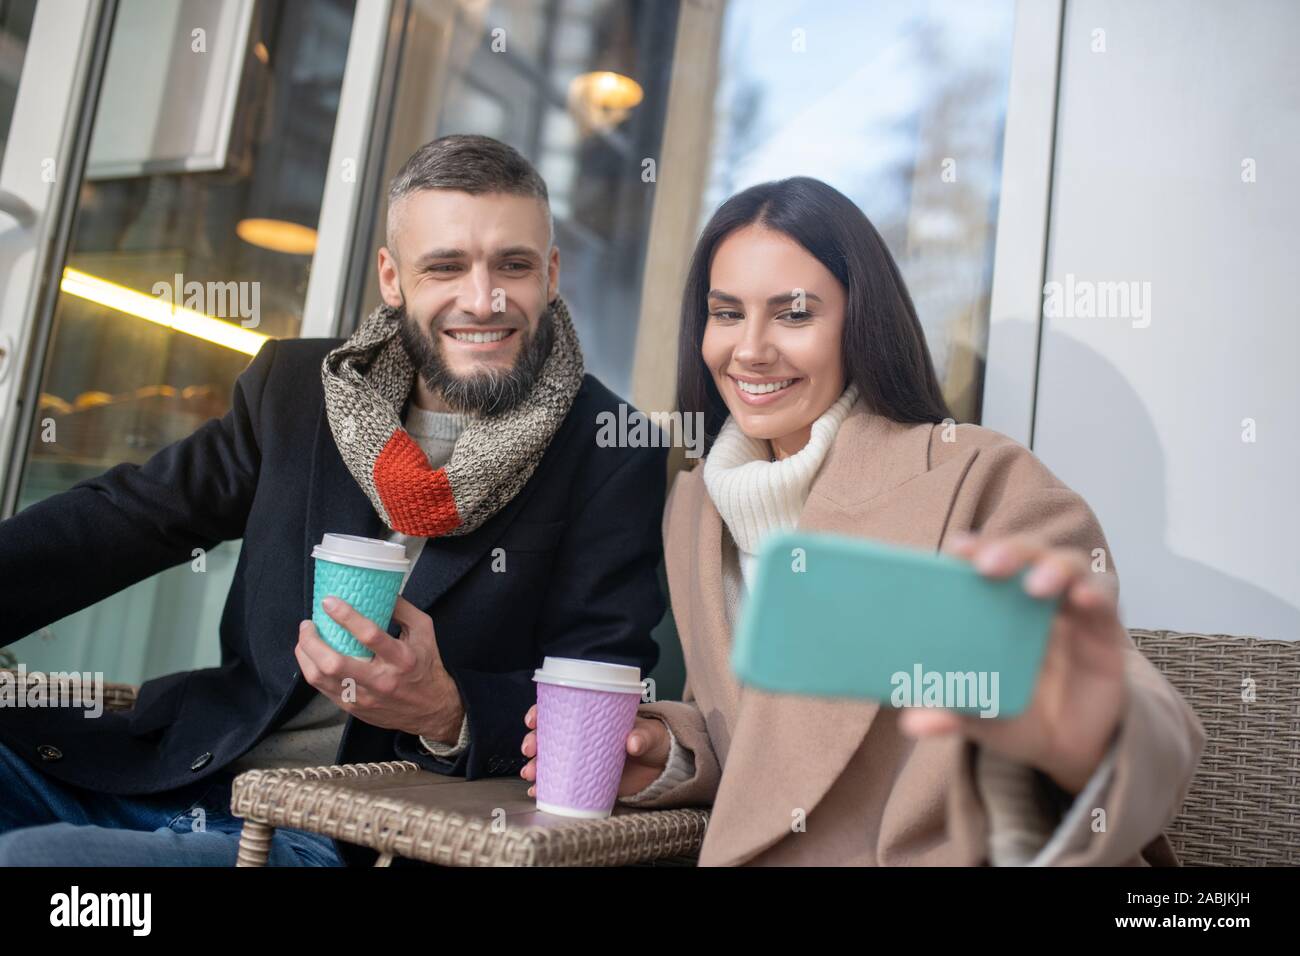 Positive delighted woman holding her new smartphone Stock Photo